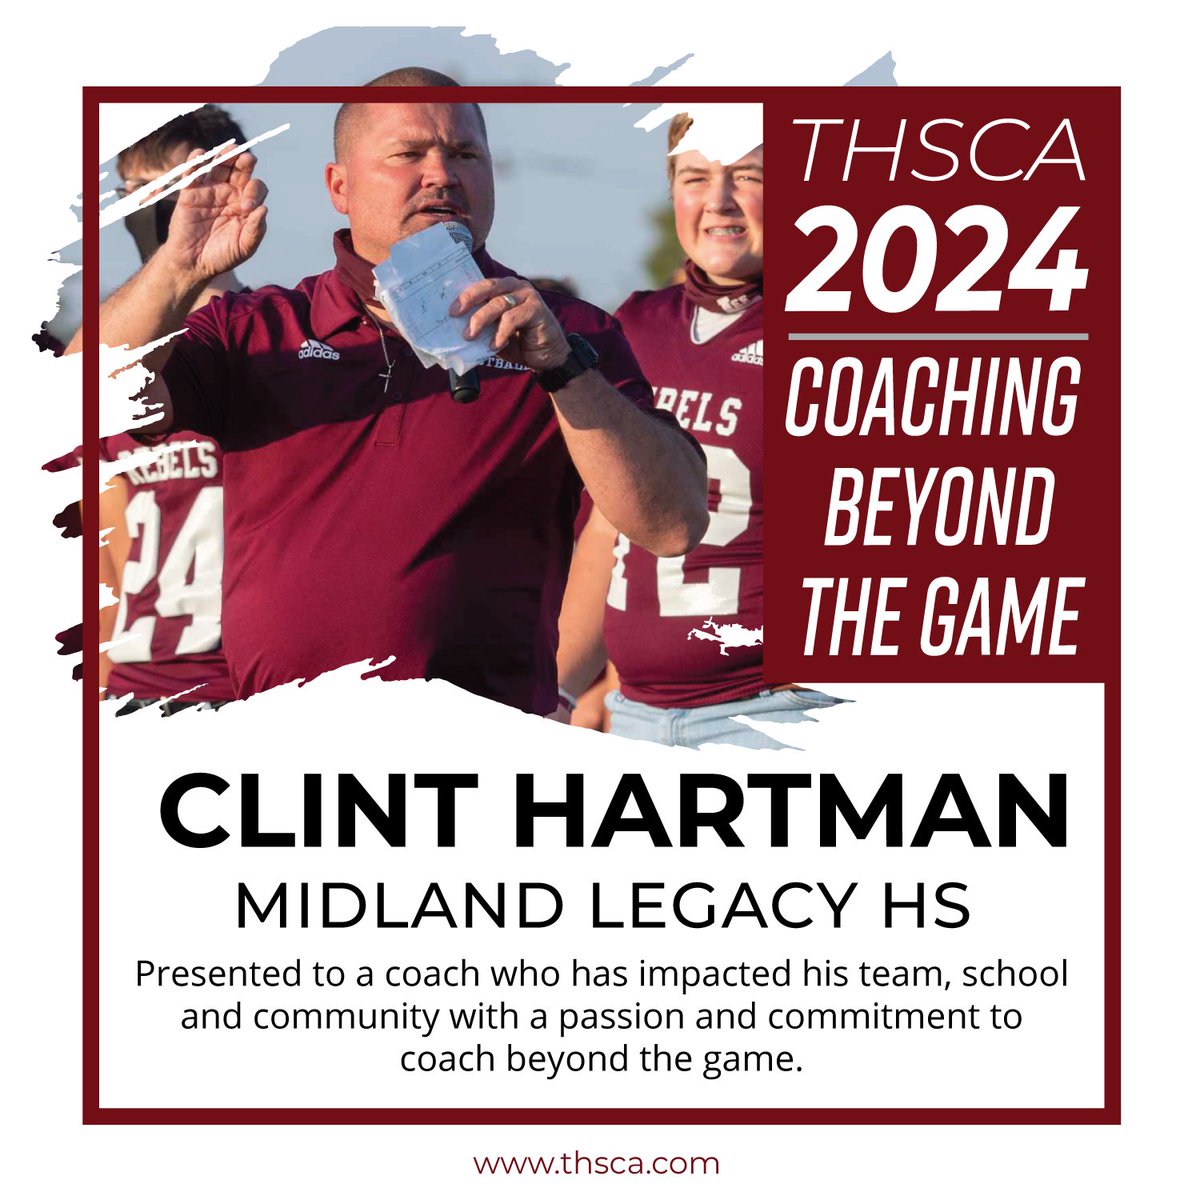 CONGRATULATIONS to our Coaching Beyond the Game Award winner, CLINT HARTMAN from Midland Legacy HS!👏 You have empowered athletes and strengthened communities, thank you for your commitment to coach beyond the game! #THSCAproud